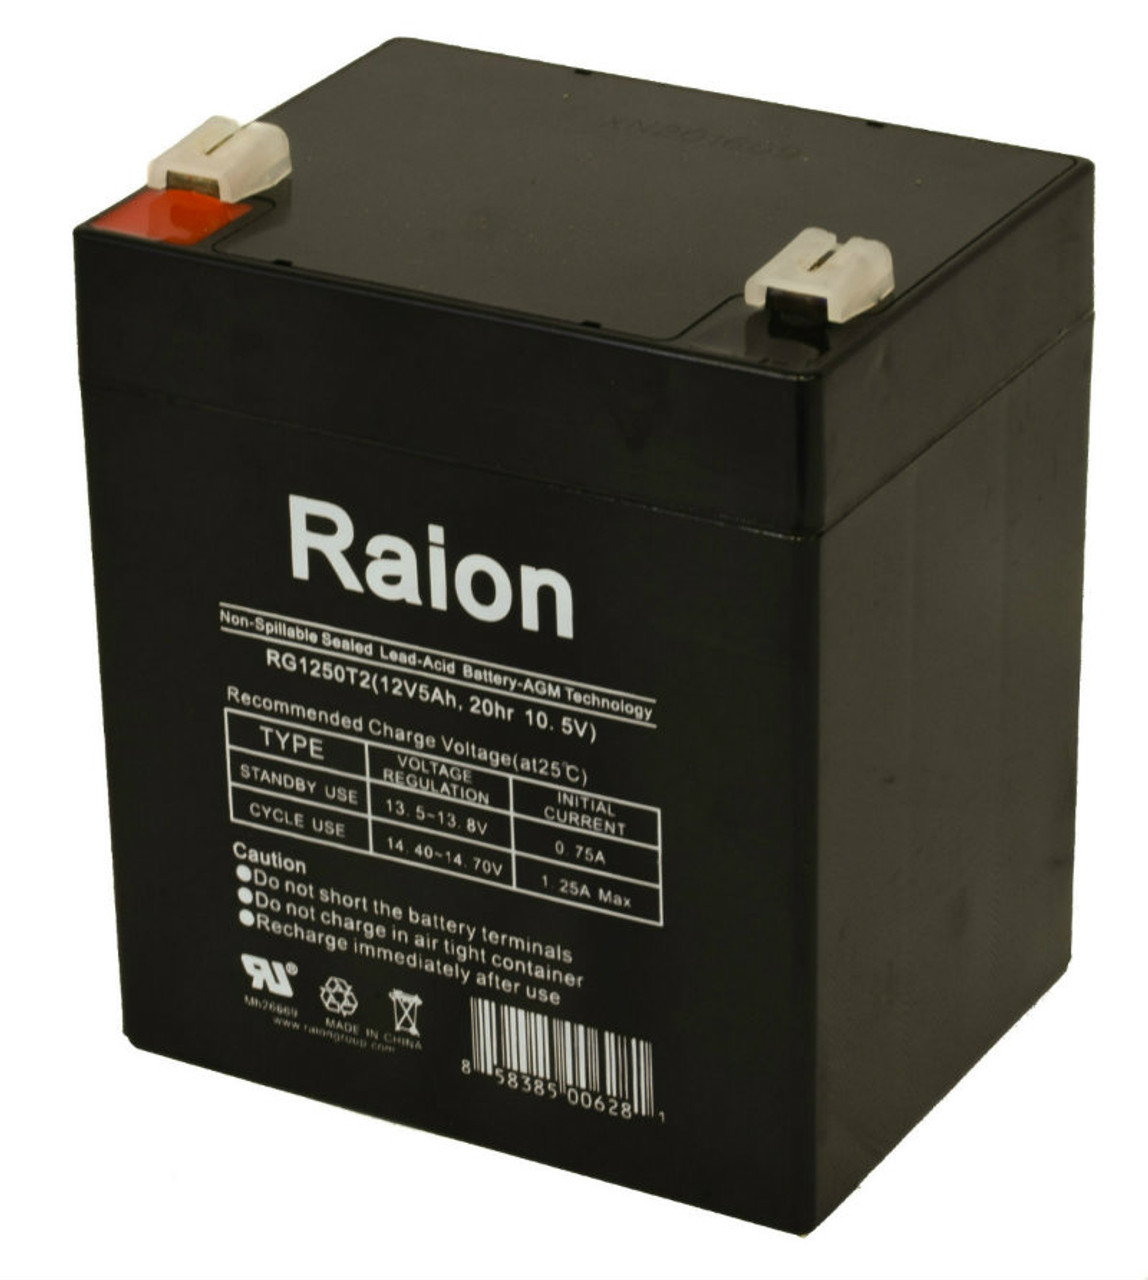 Raion Power 12V 5Ah Replacement Fire Alarm Control Panel Battery for Ademco 4110DL